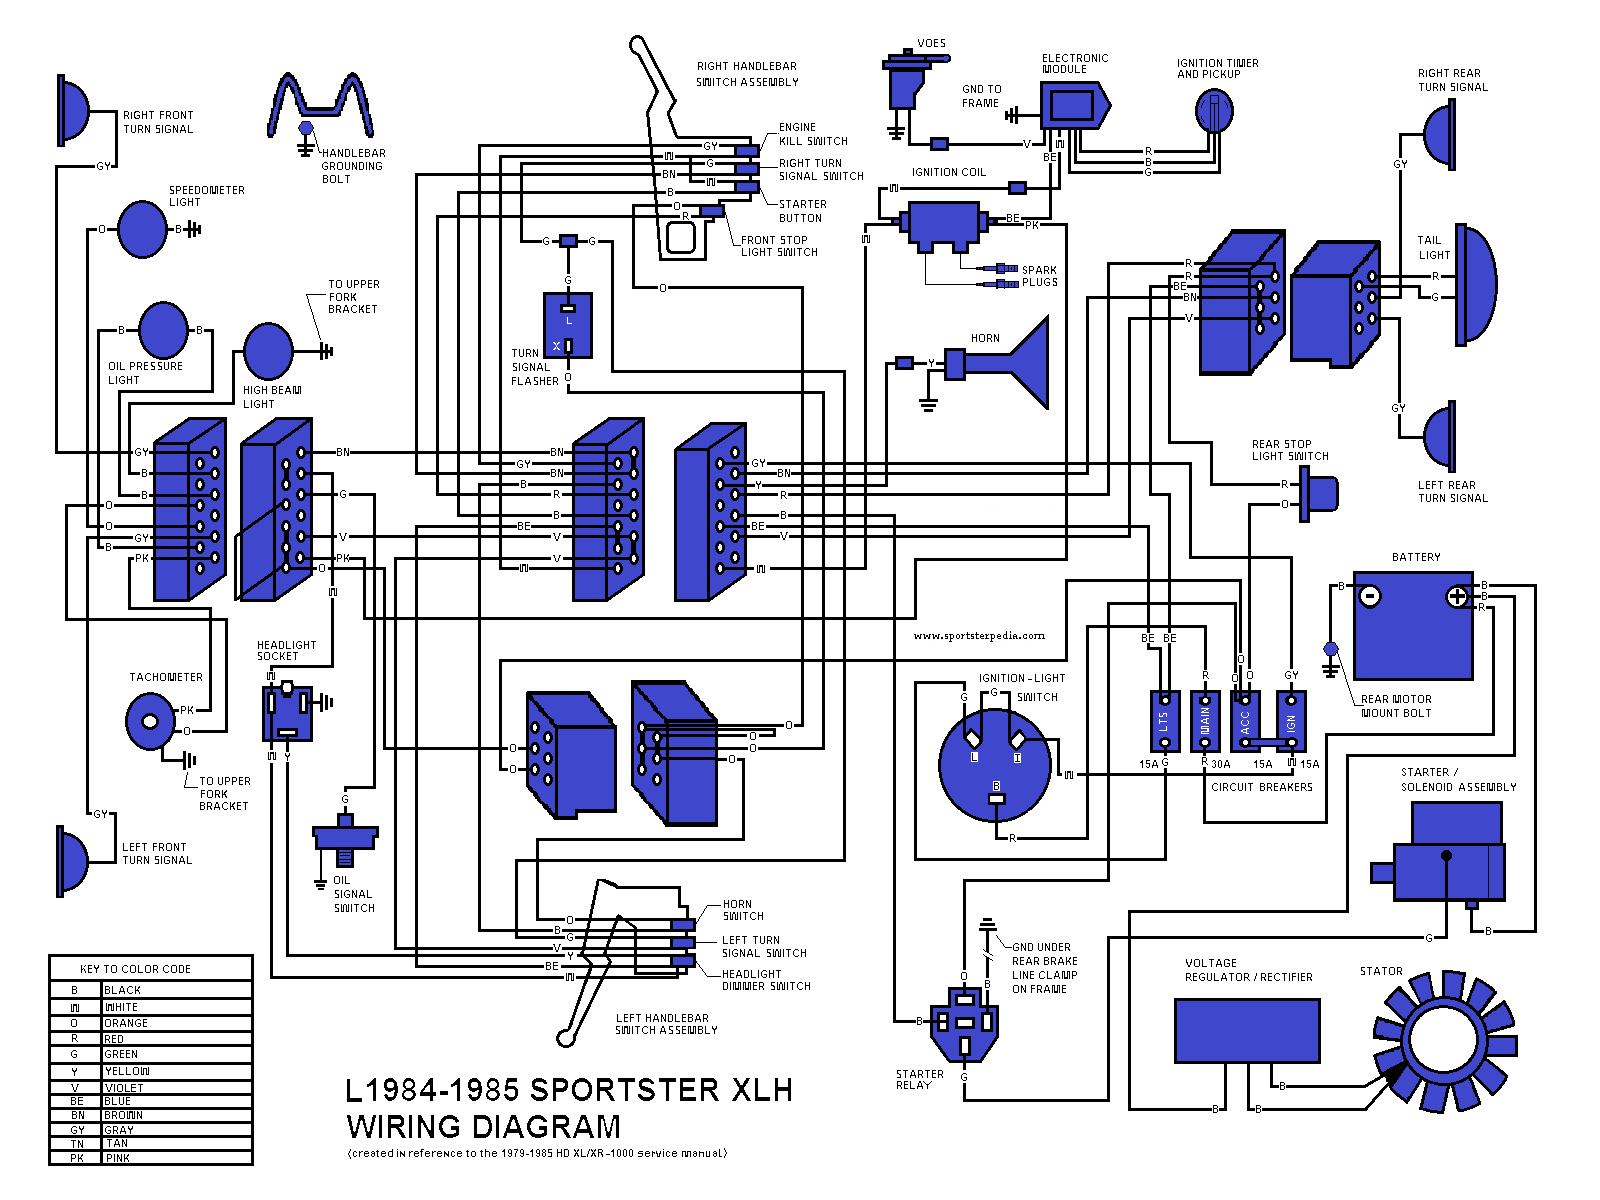 Ironhead Illustrated Wiring Diagrams - Page 2 - The Sportster and Buell